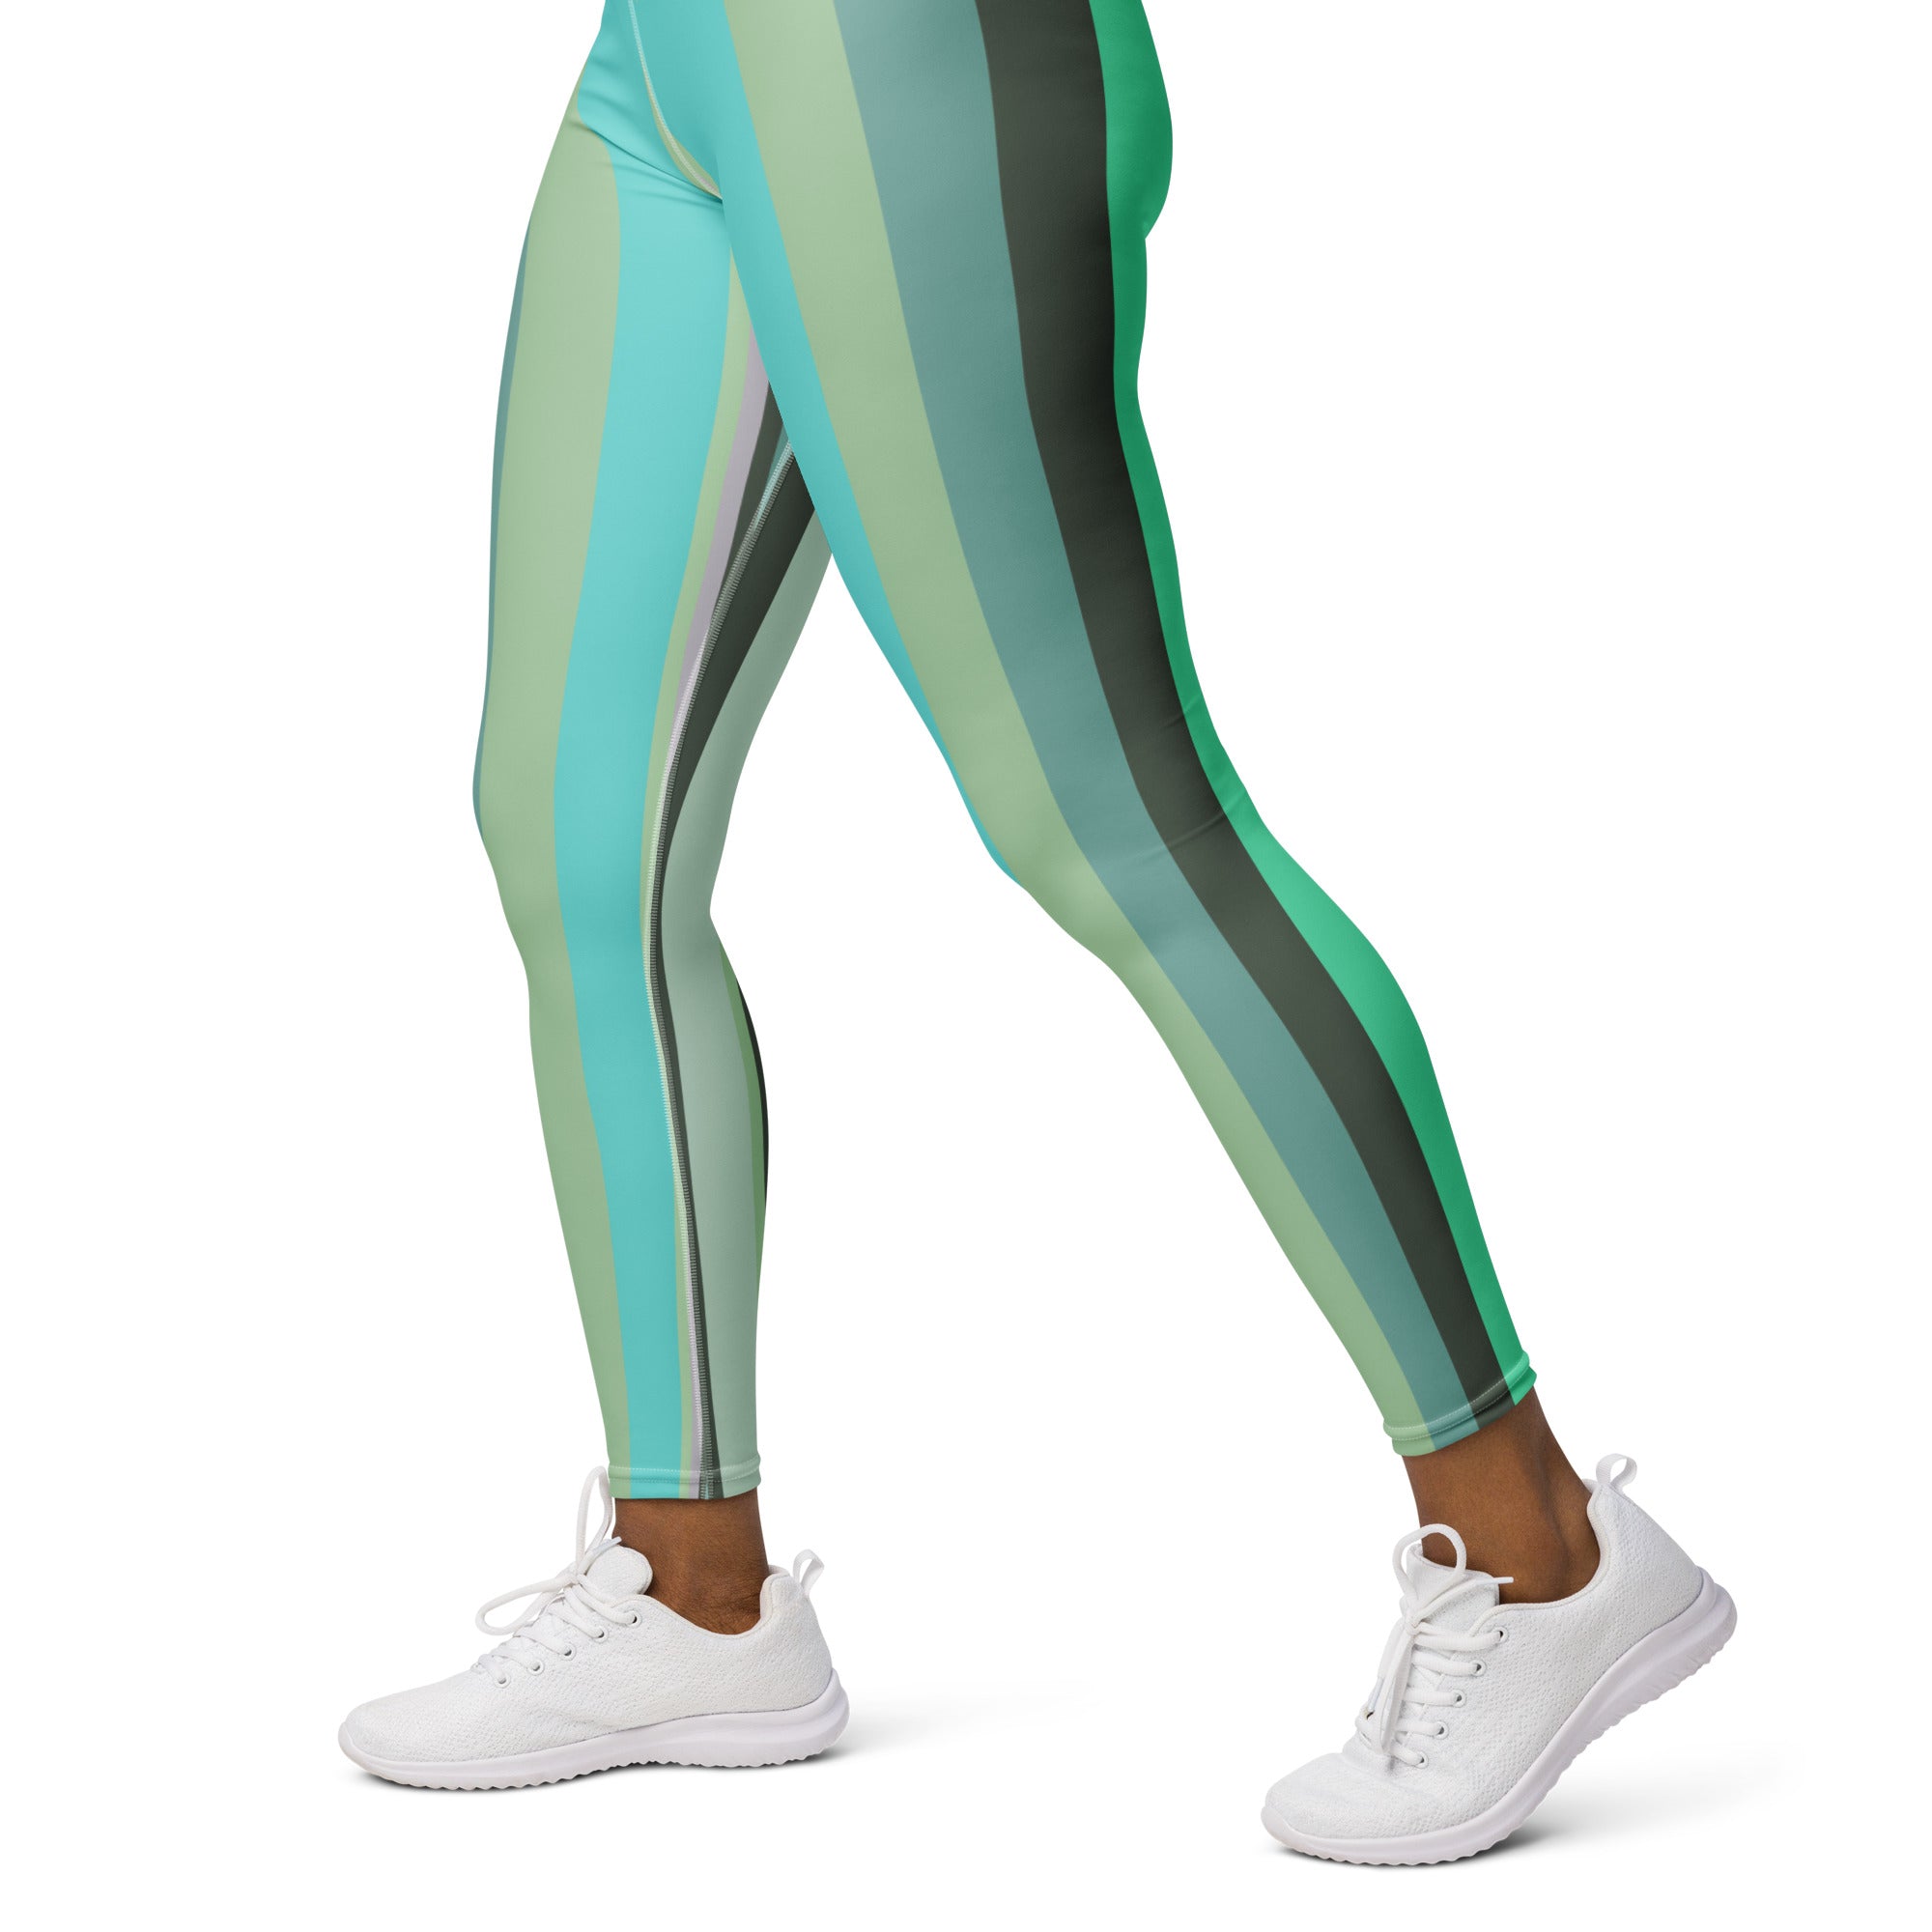 Soft and stretchable yoga leggings with a unique colorful boxed stripe design, inspired by the harmony of the cosmos.